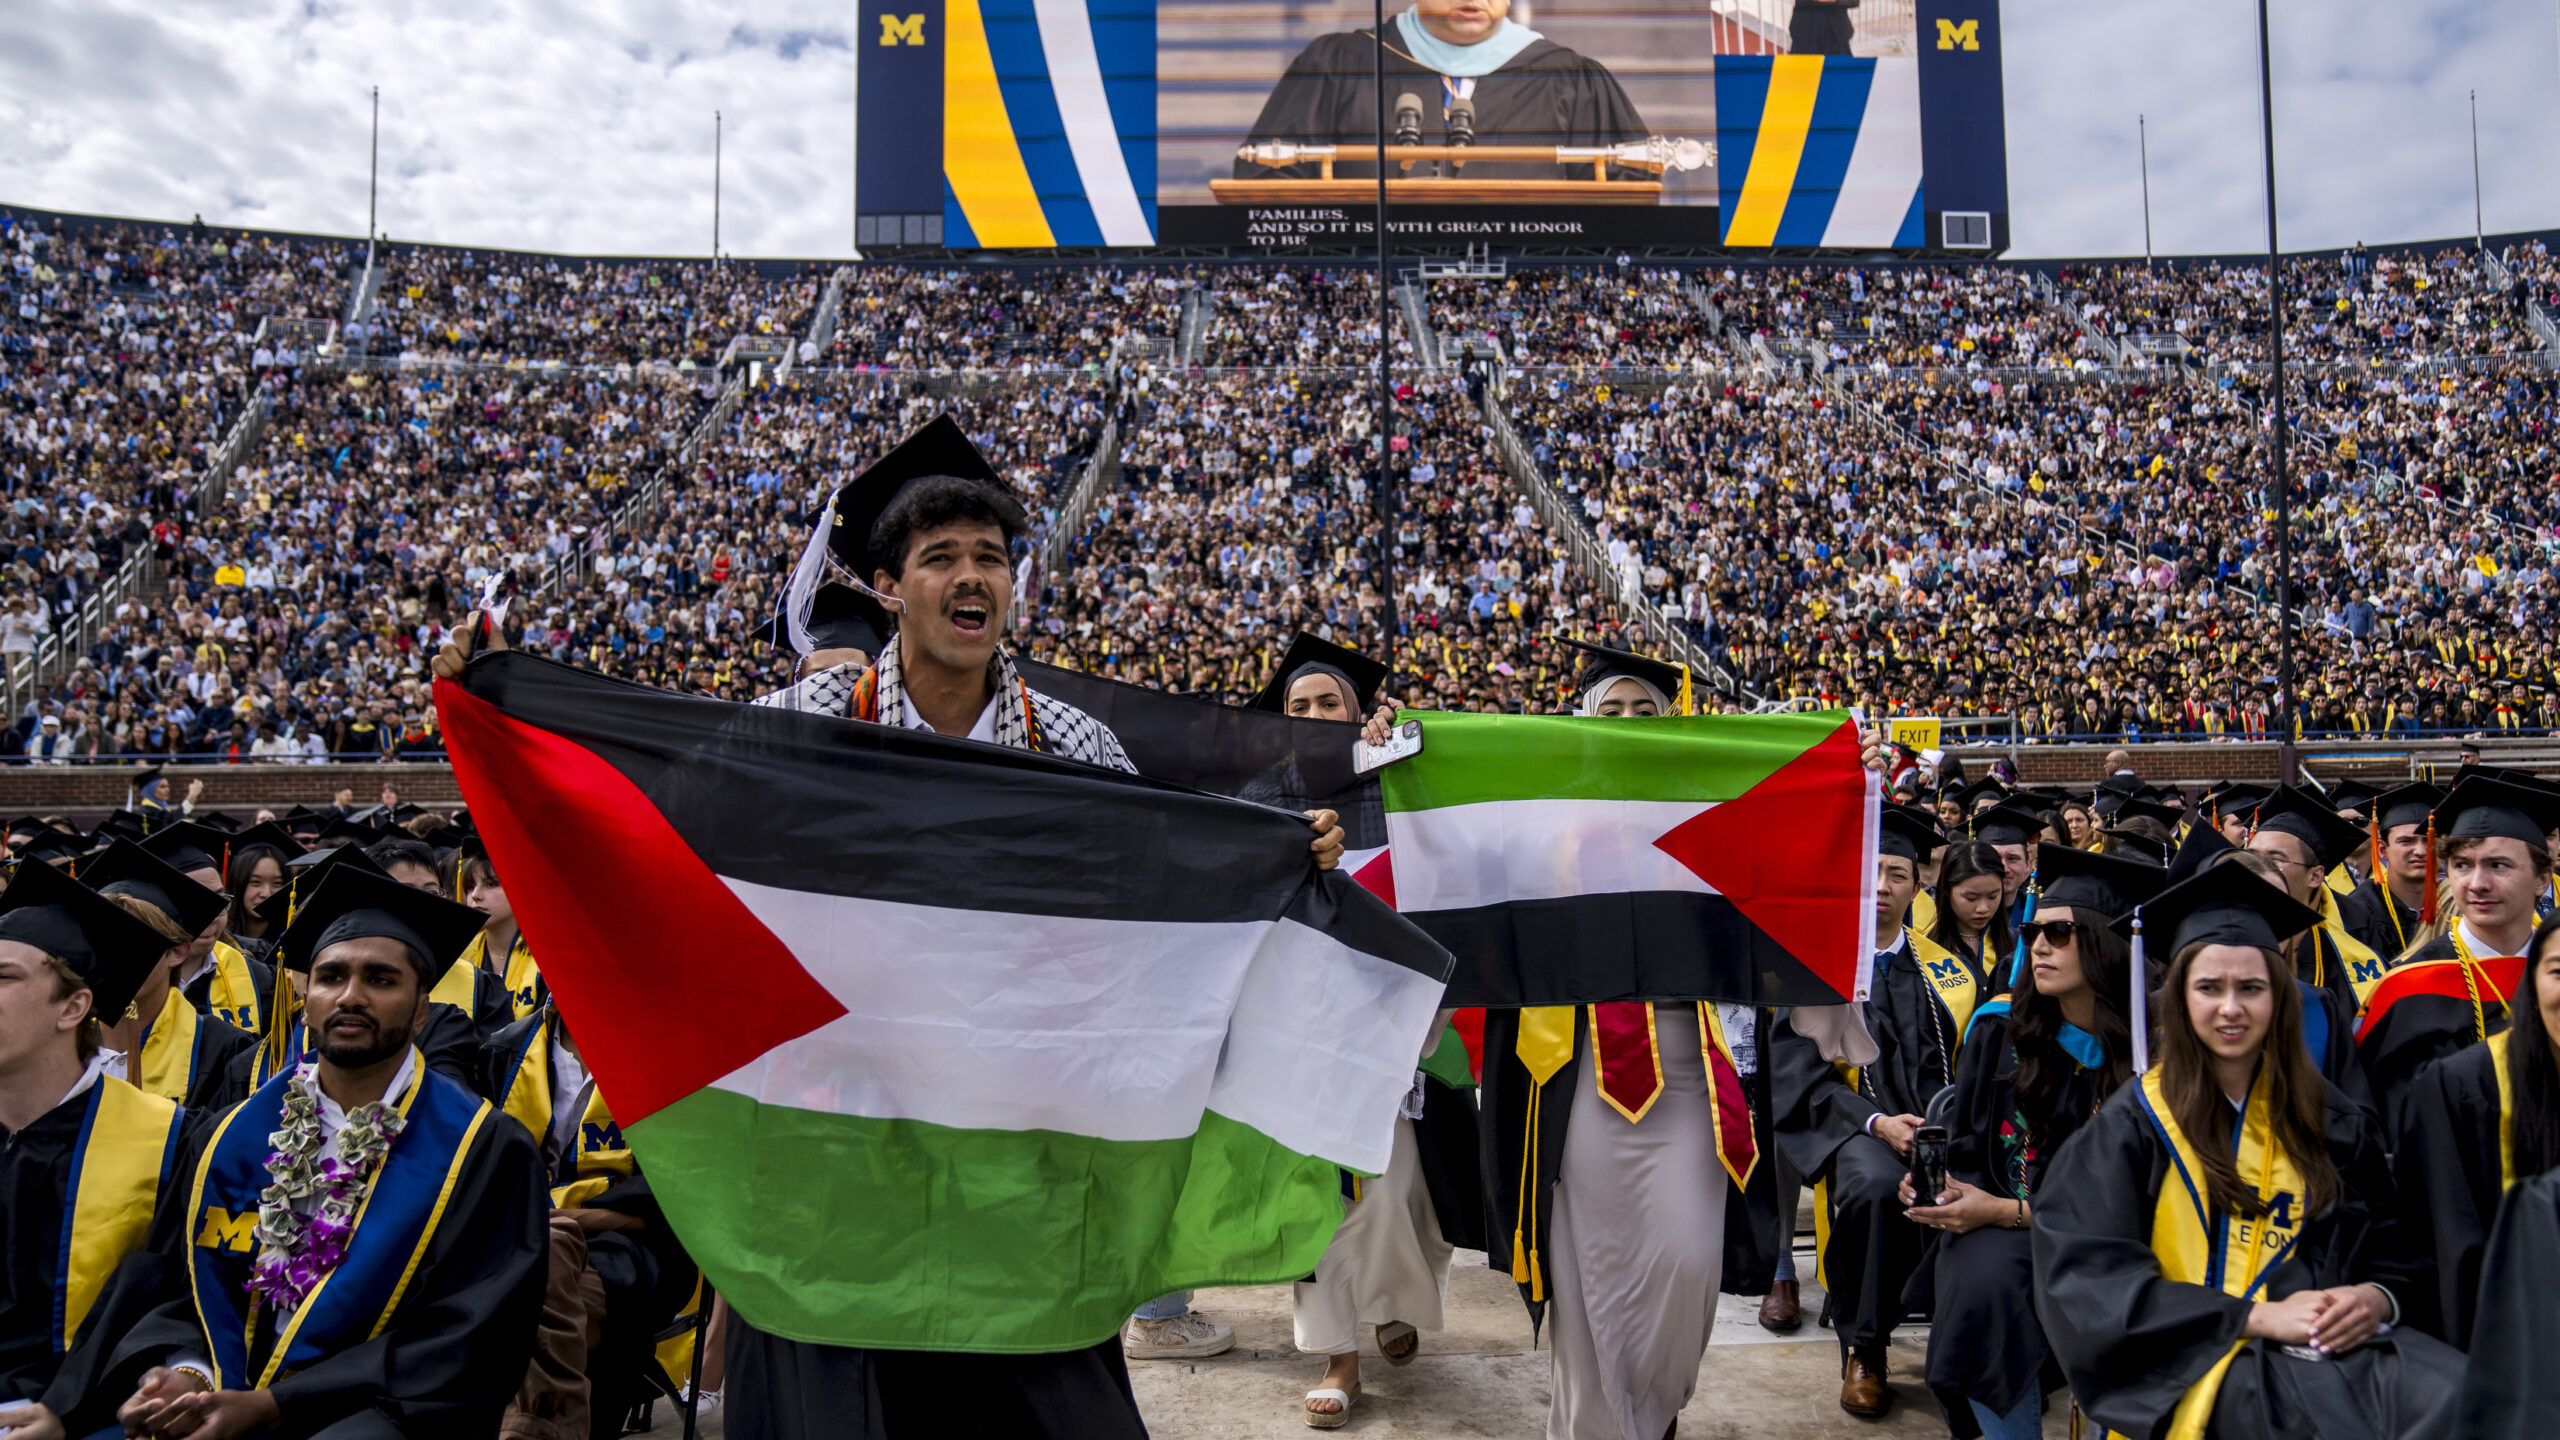 Michigan Crowd Applauds Police Handling Pro-Palestinian Protest at Graduation Event